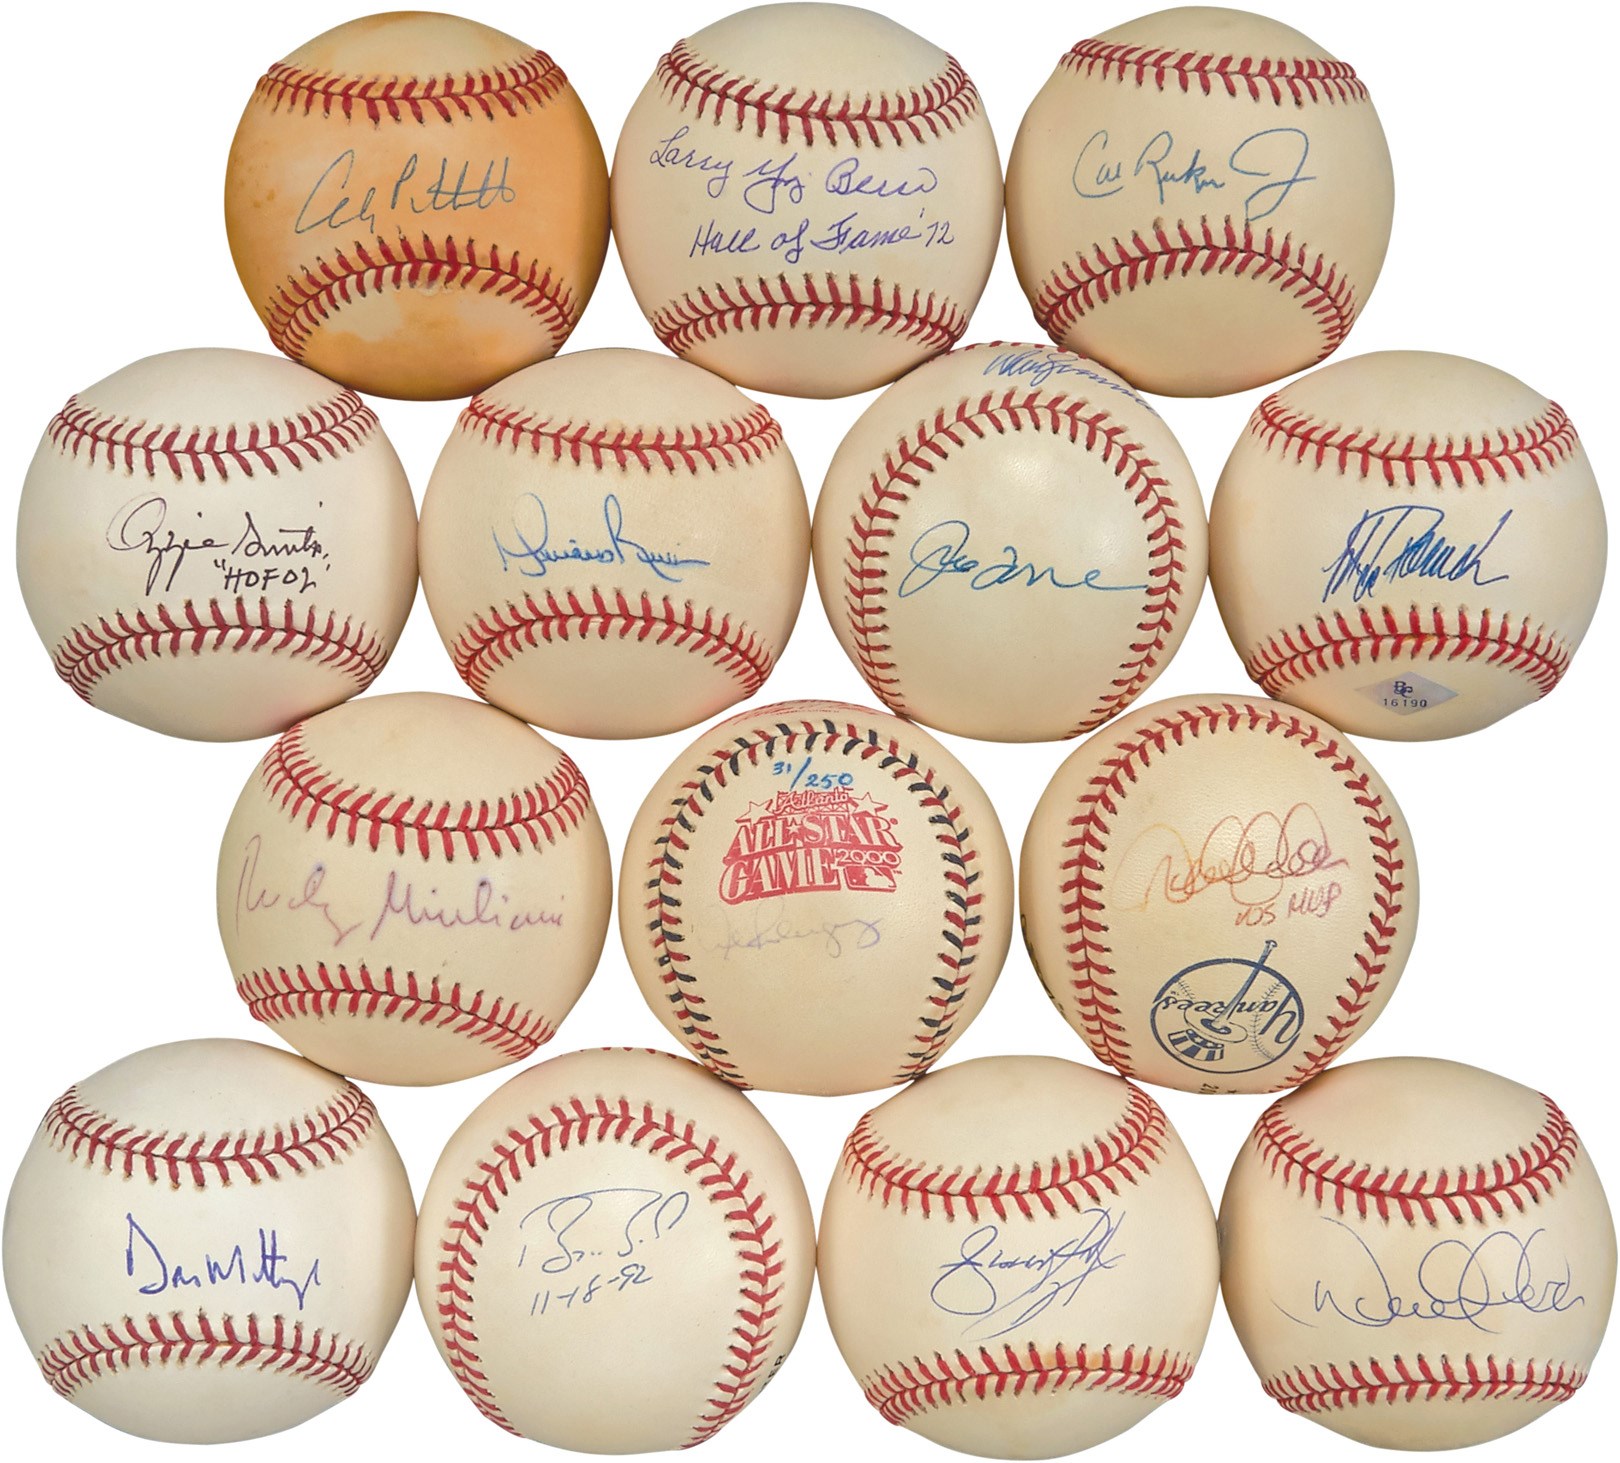 Yankee Legends and Baseball Stars Signed Baseball Collection with (3) Jeters (35+)